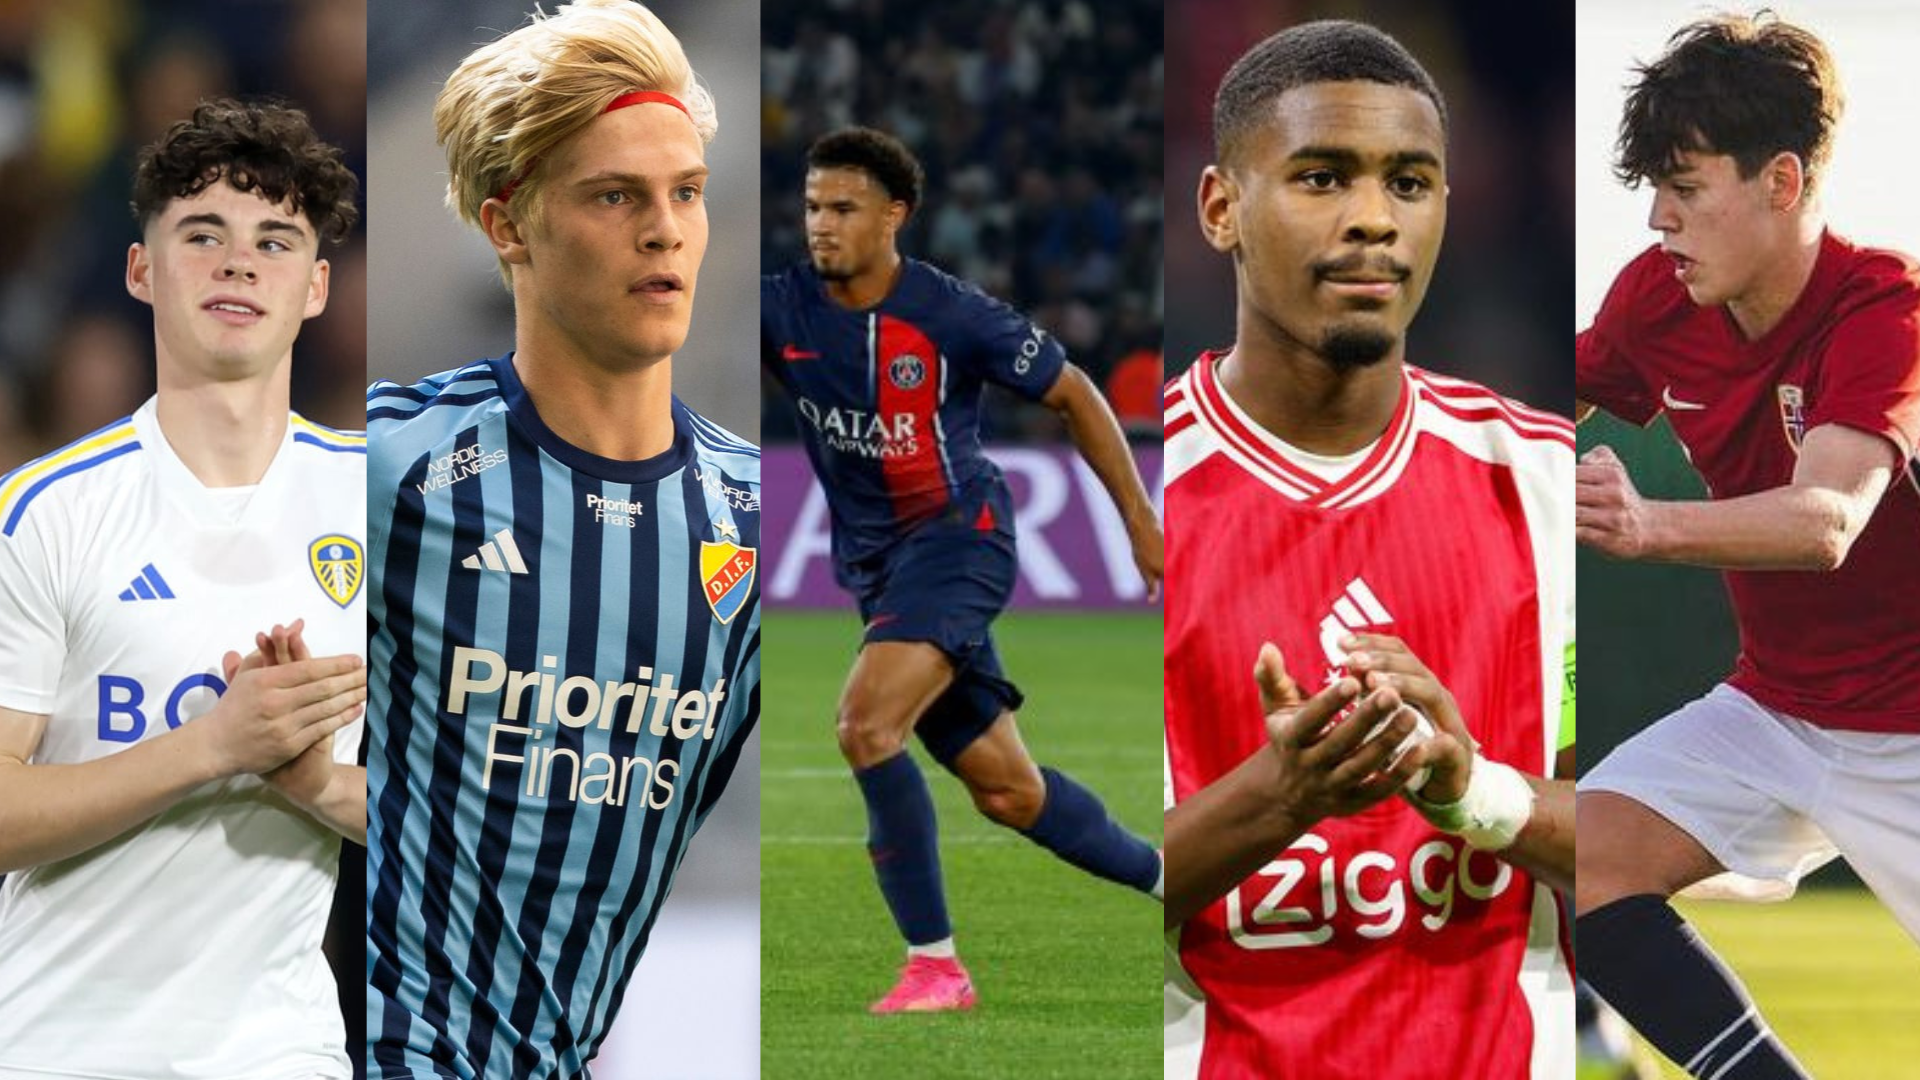 The next big names in world football